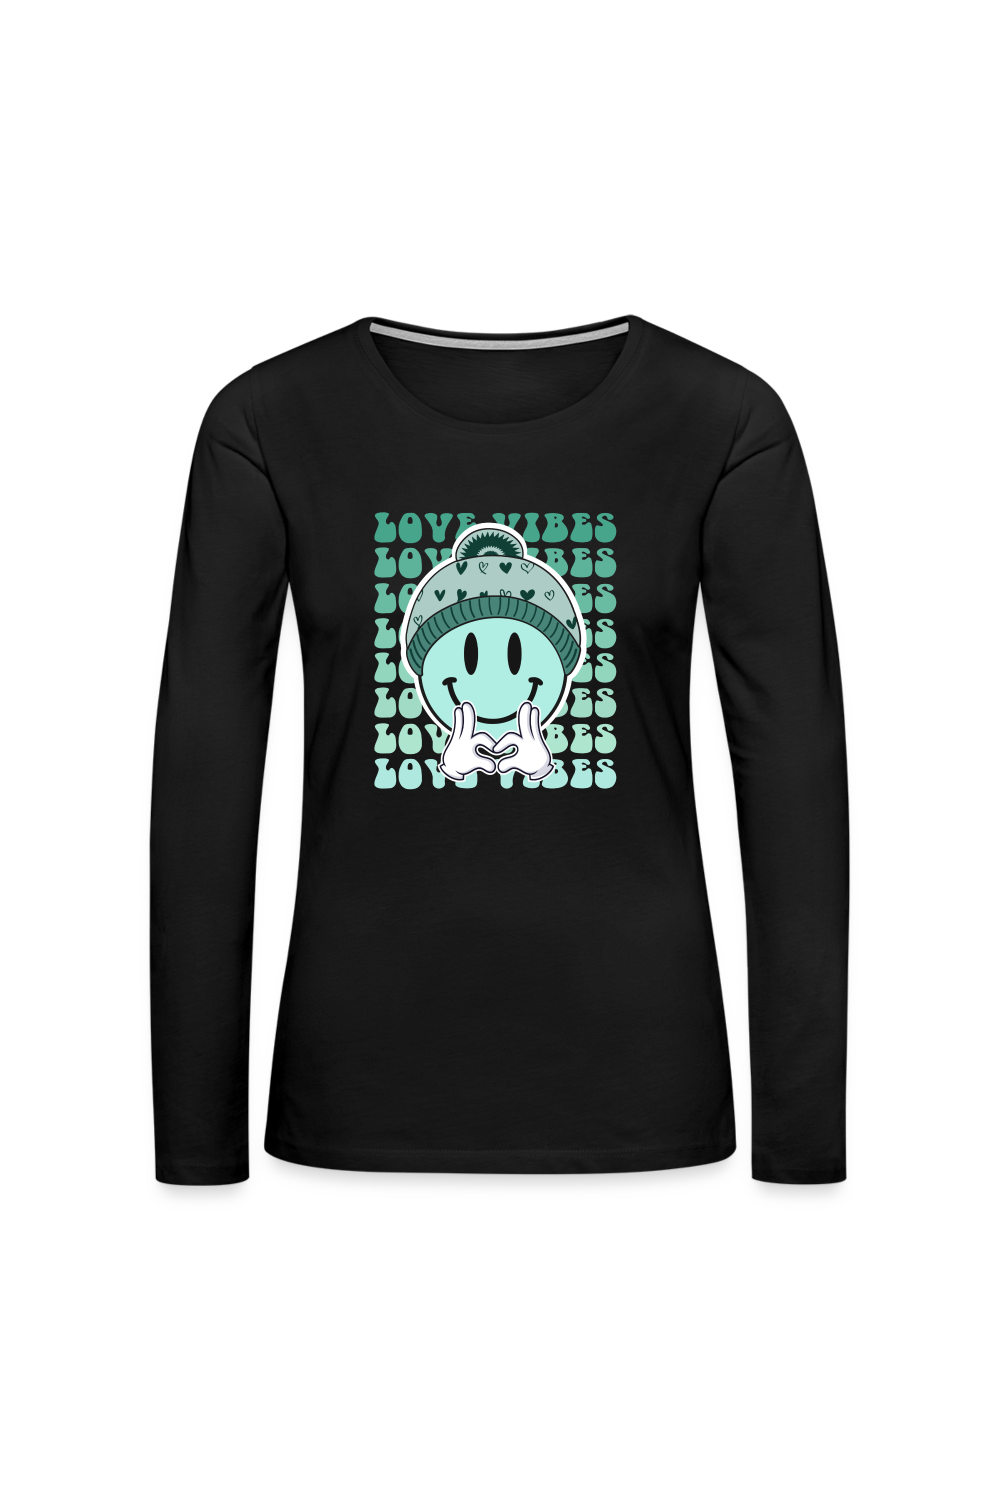 Women's Blue Smiley Face Love Vibes Valentine's Day Long Sleeve T-Shirt - black - NicholesGifts.online